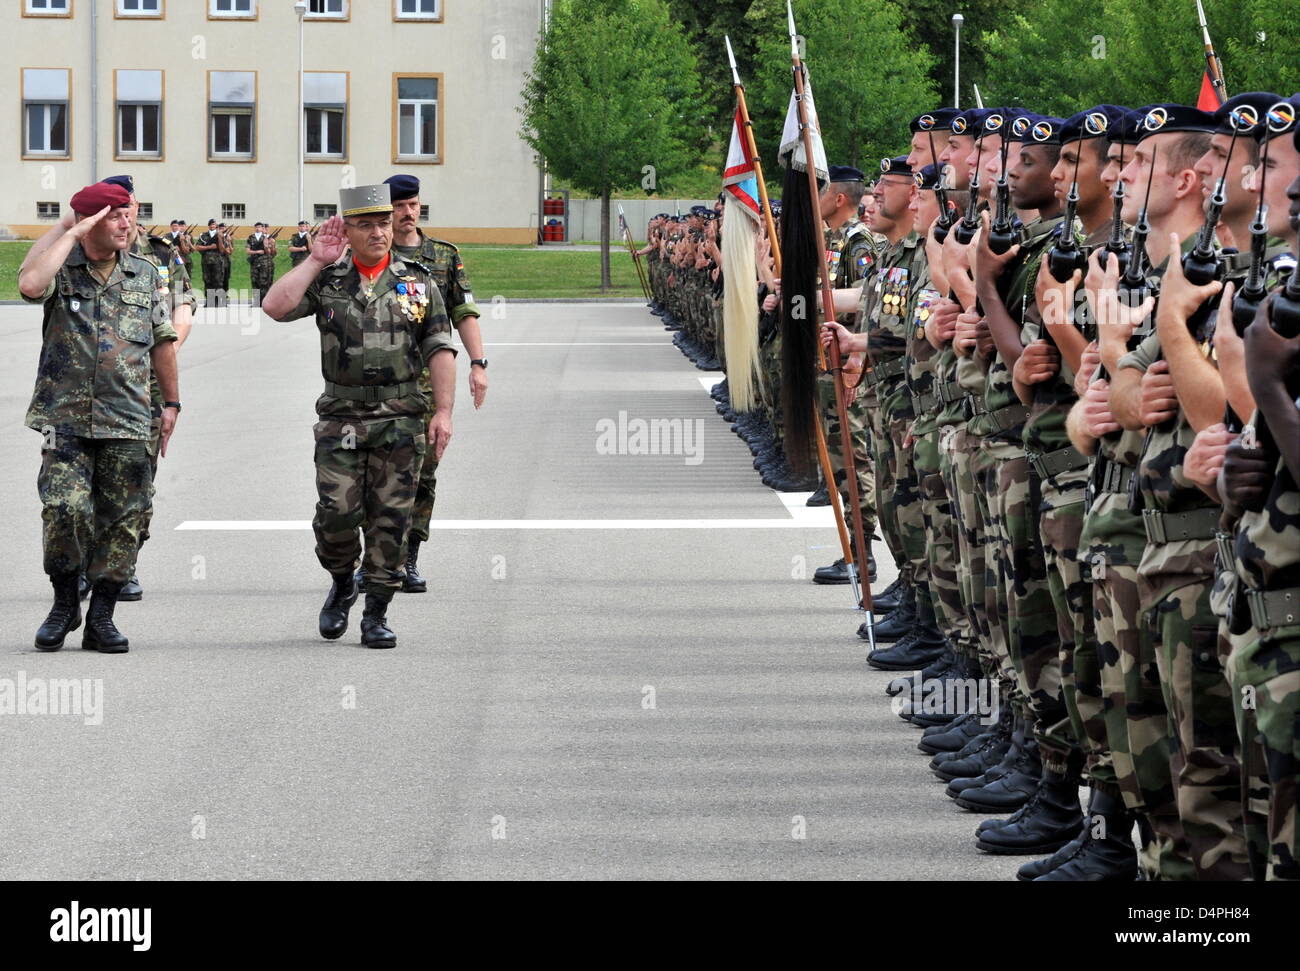 The inspector of the German army, Hans-Otto Budde (L) and his French counterpart (2-L), General Elrick Irastorza, review soldiers during a muster at the brigade?s barracks in Muellheim, Germany, 27 June 2009. The brigade celebrated its 20th anniversary. Photo: Rolf Haid Stock Photo